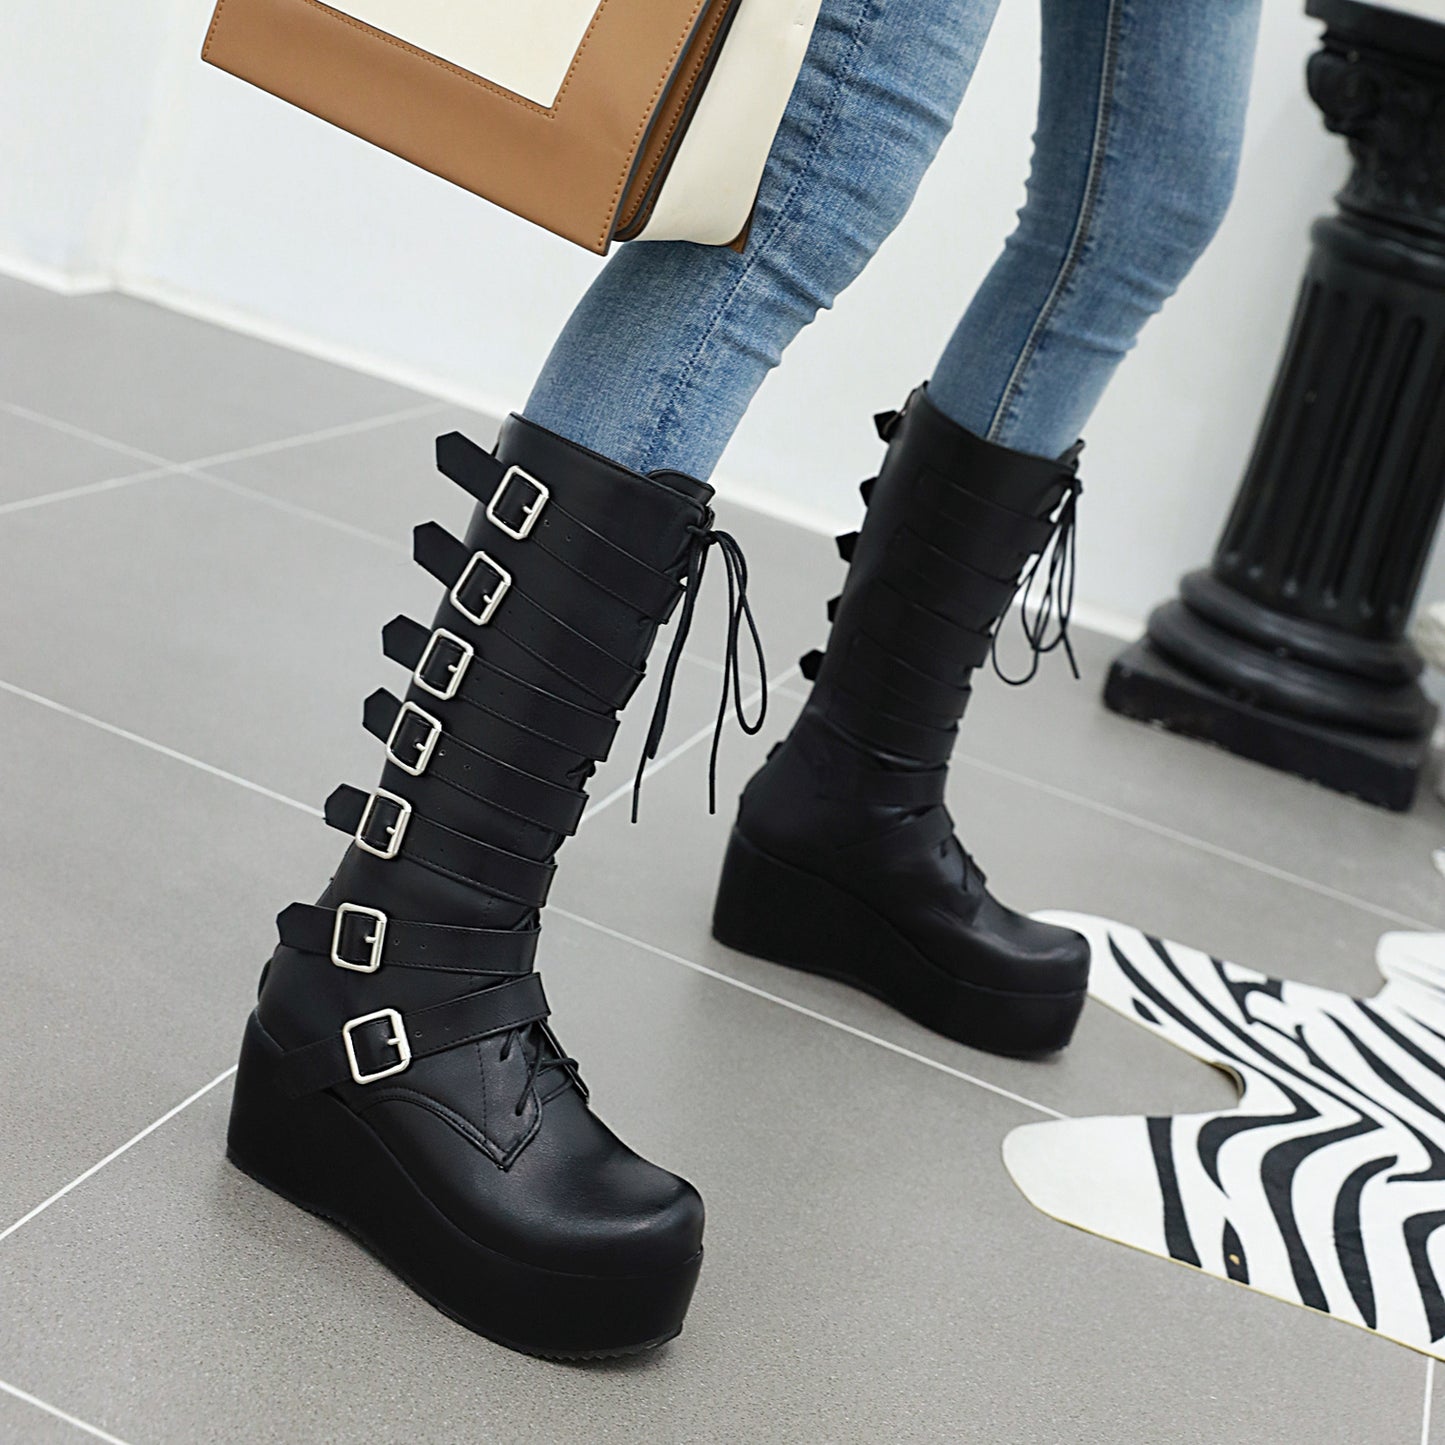 Autumn And Winter New Women's Boots Punk Style Big Round Head Thick Bottom Muffin Belt Buckle High Boots